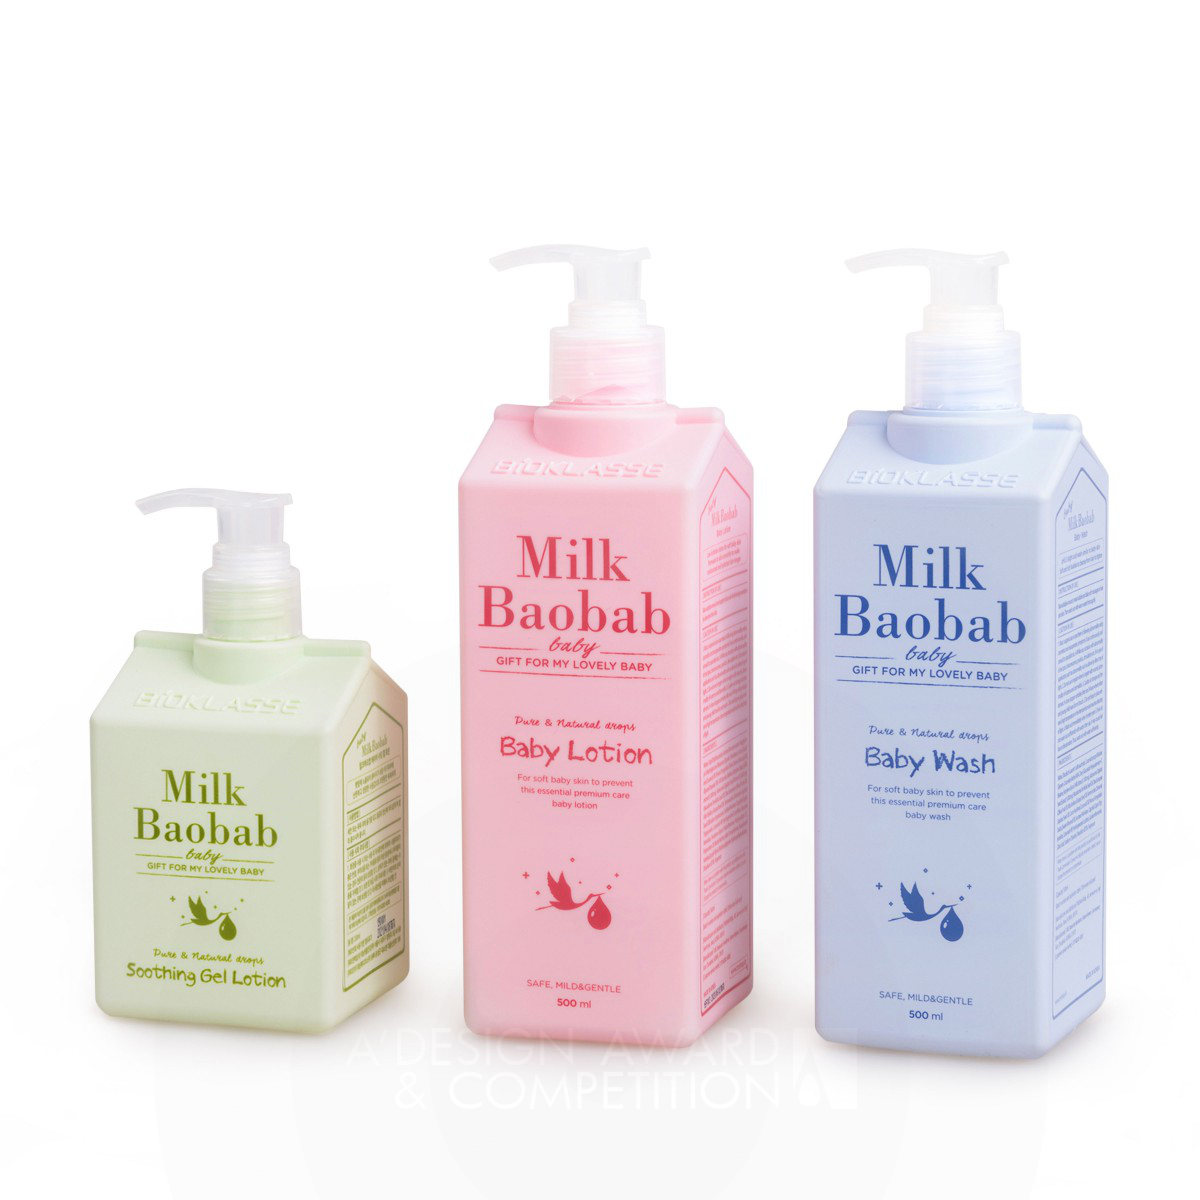 Hyein Kim wins Silver at the prestigious A' Packaging Design Award with Milk Baobab Baby Skin Care Packaging.